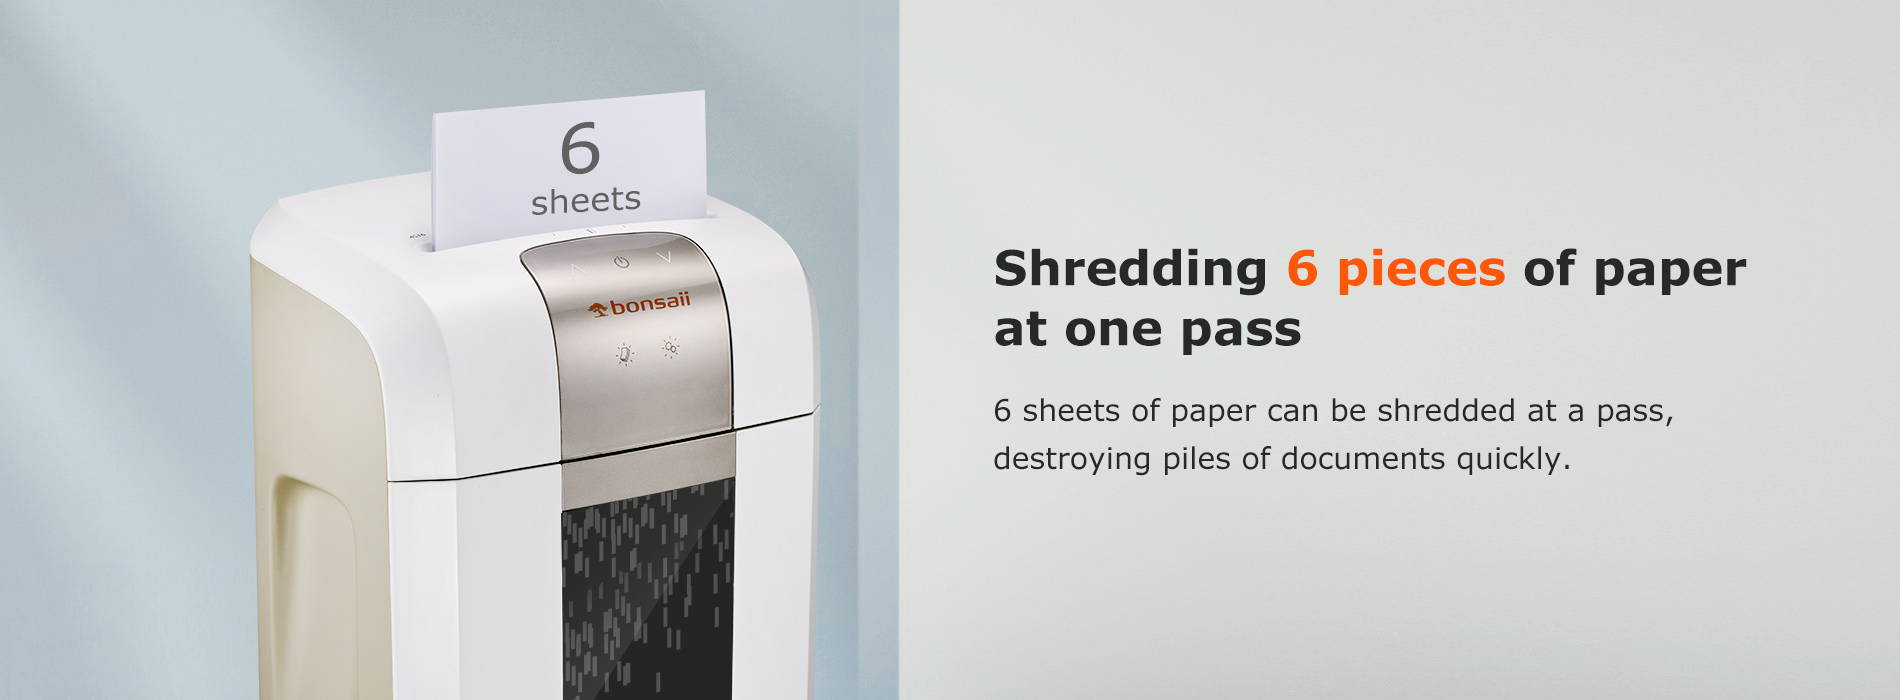 Shredding 6 pieces of paper at one pass 6 sheets of paper can be shredded at a pass, destroying piles of documents quickly.